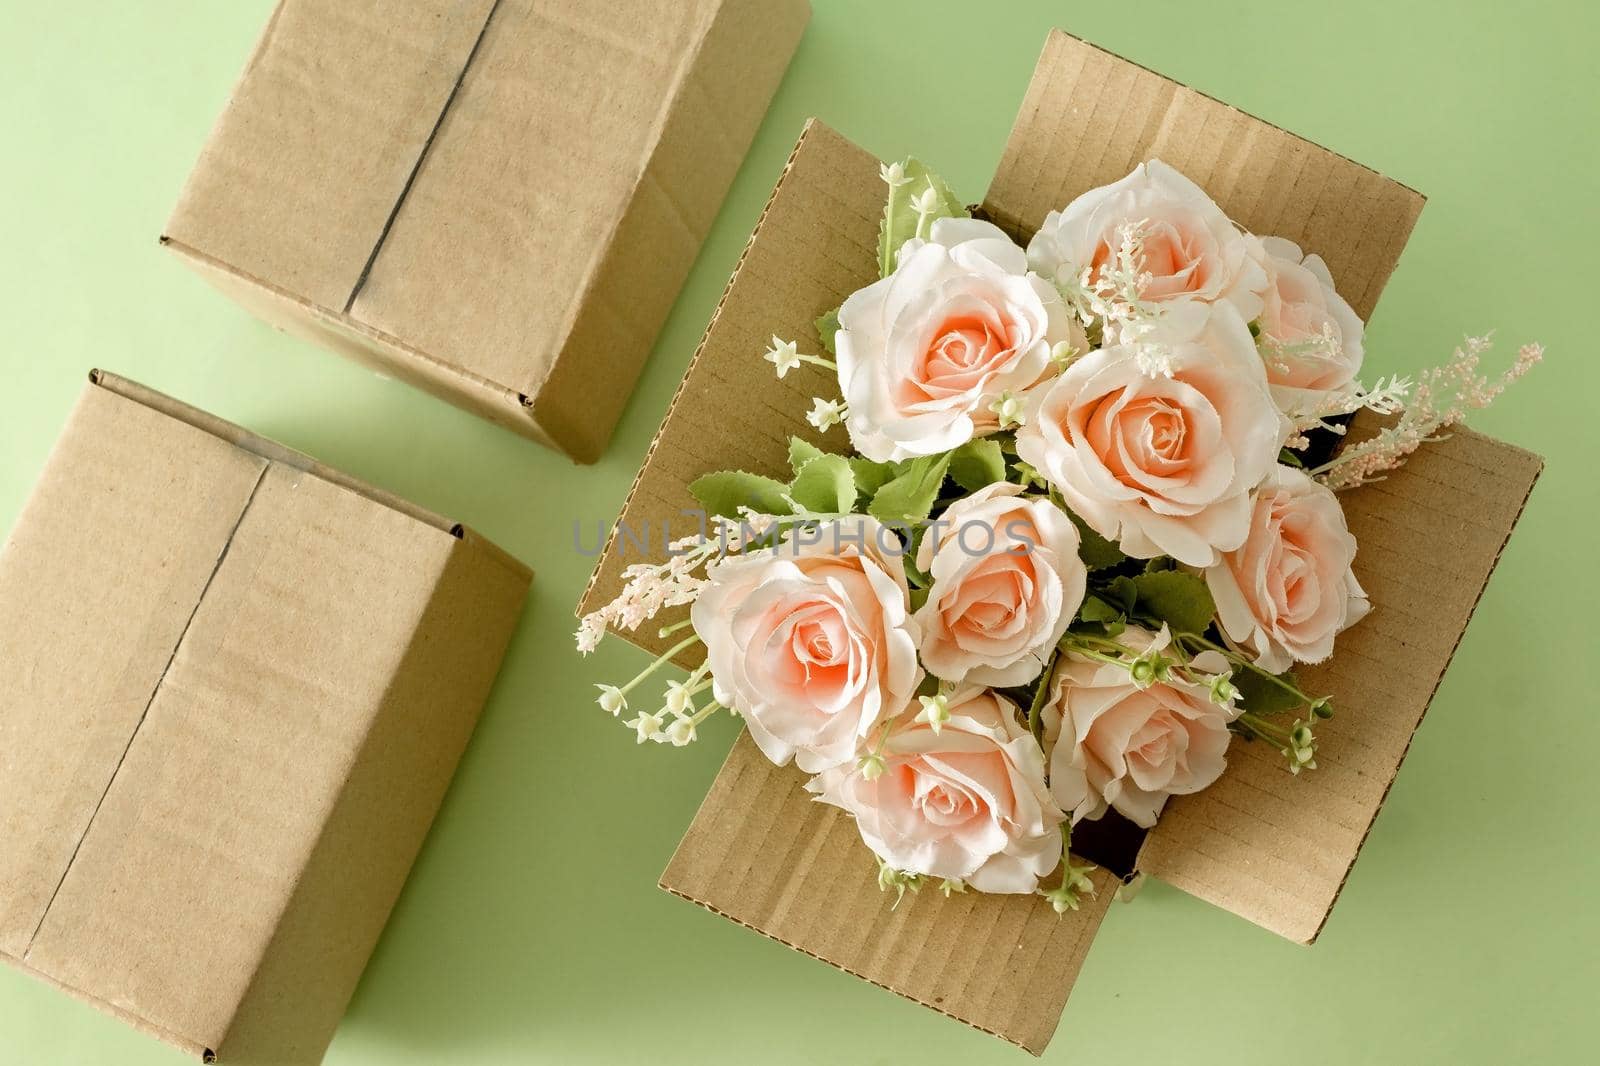 A beautiful blooming bouquet of pink roses in a parcel delivery cardboard box. Gift holiday concept and logistics service.